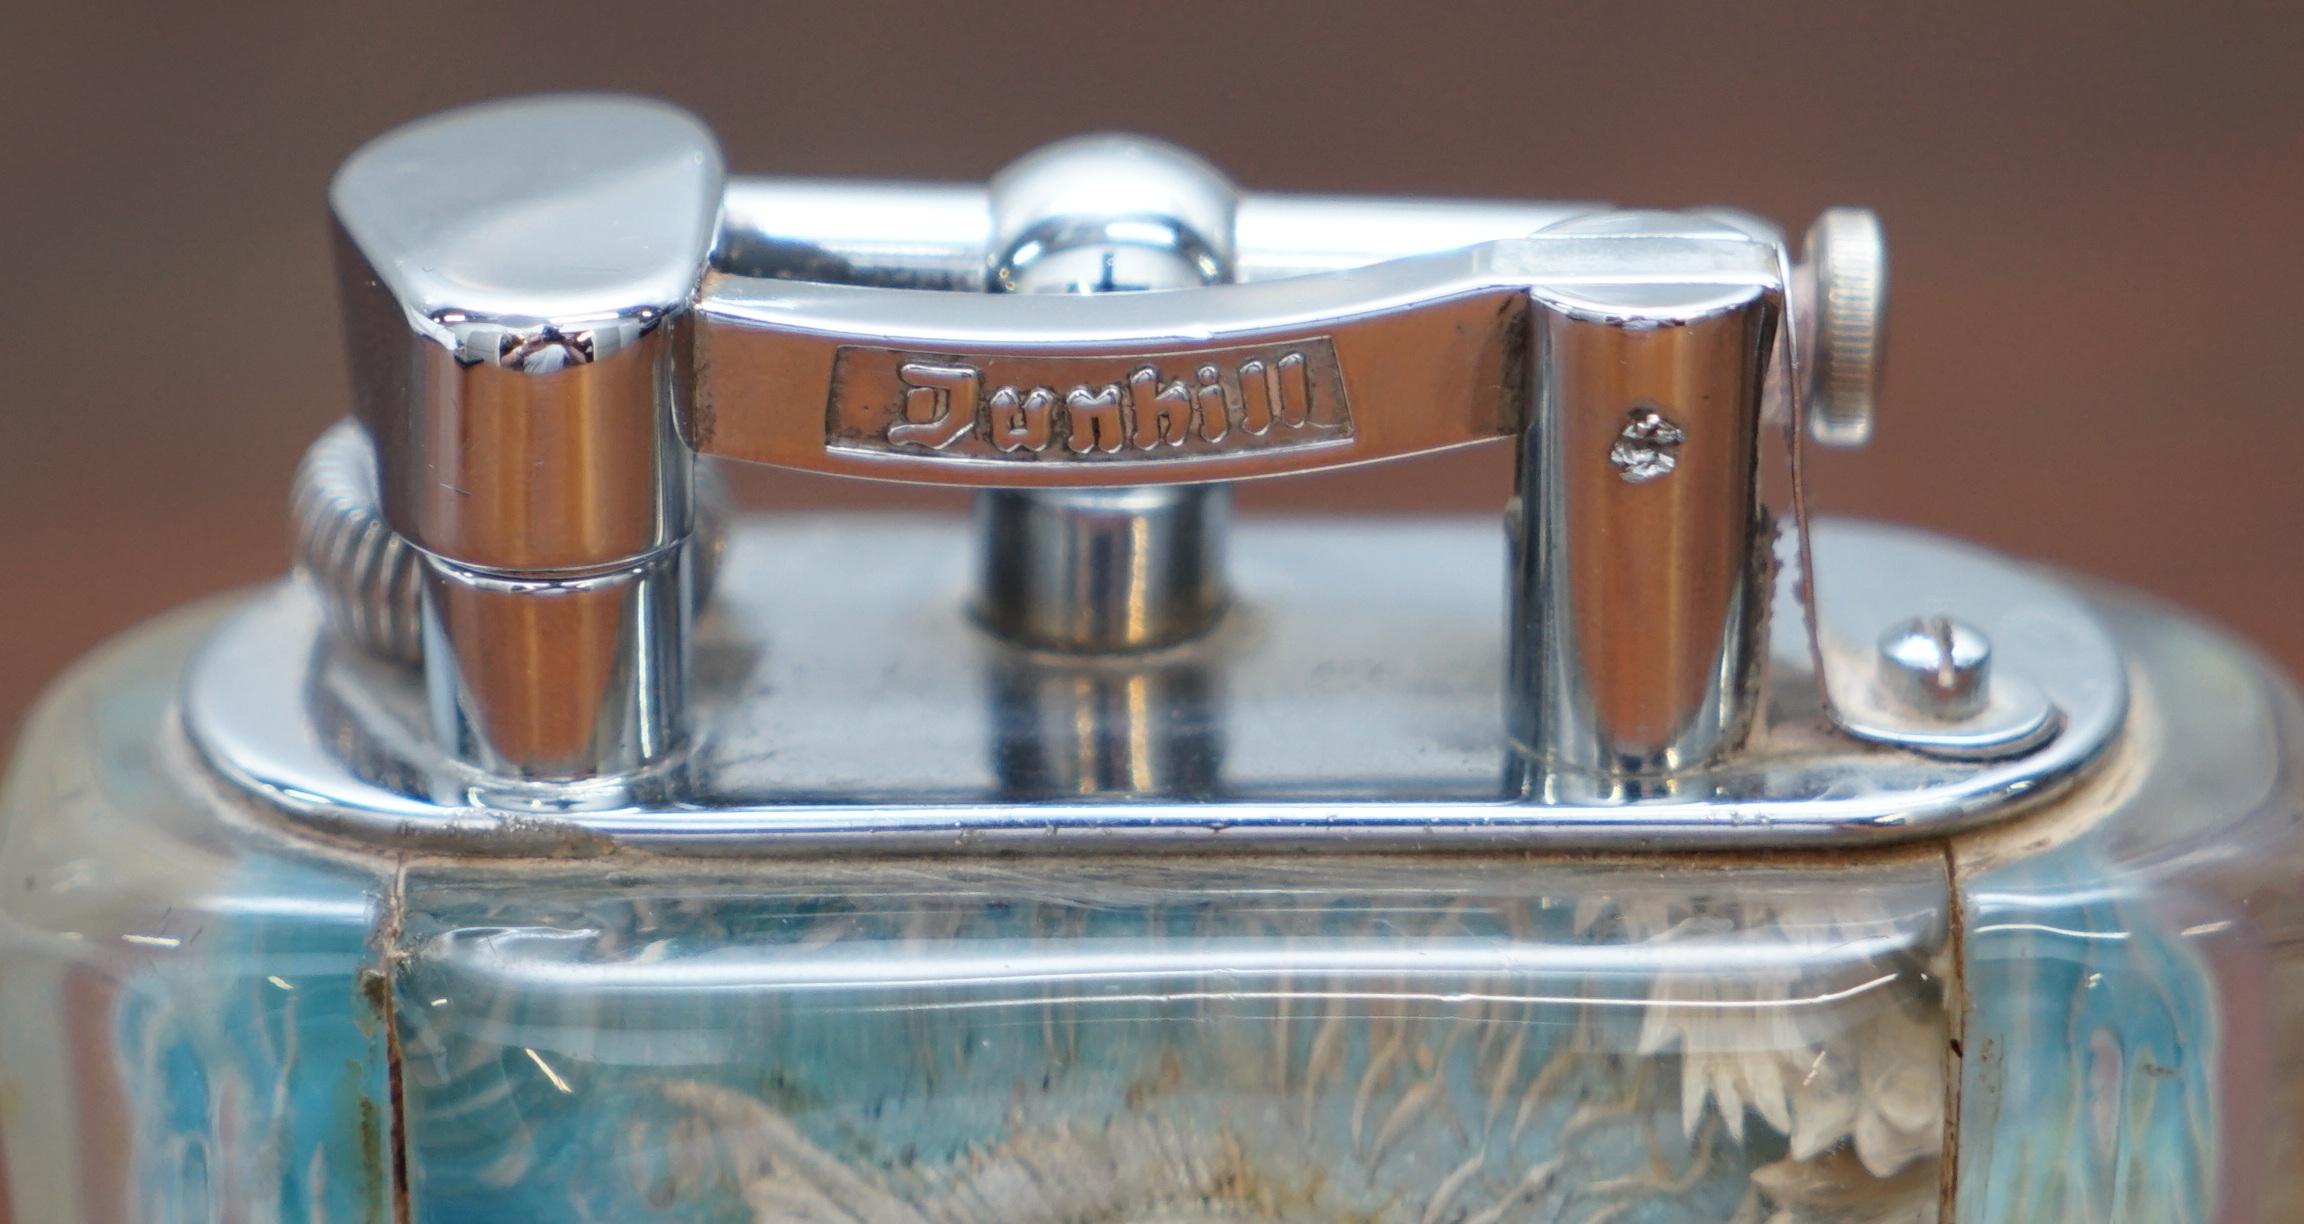 English Luxury 1950s Dunhill Aquarium Oversized Table Lighter Made in England Chrome